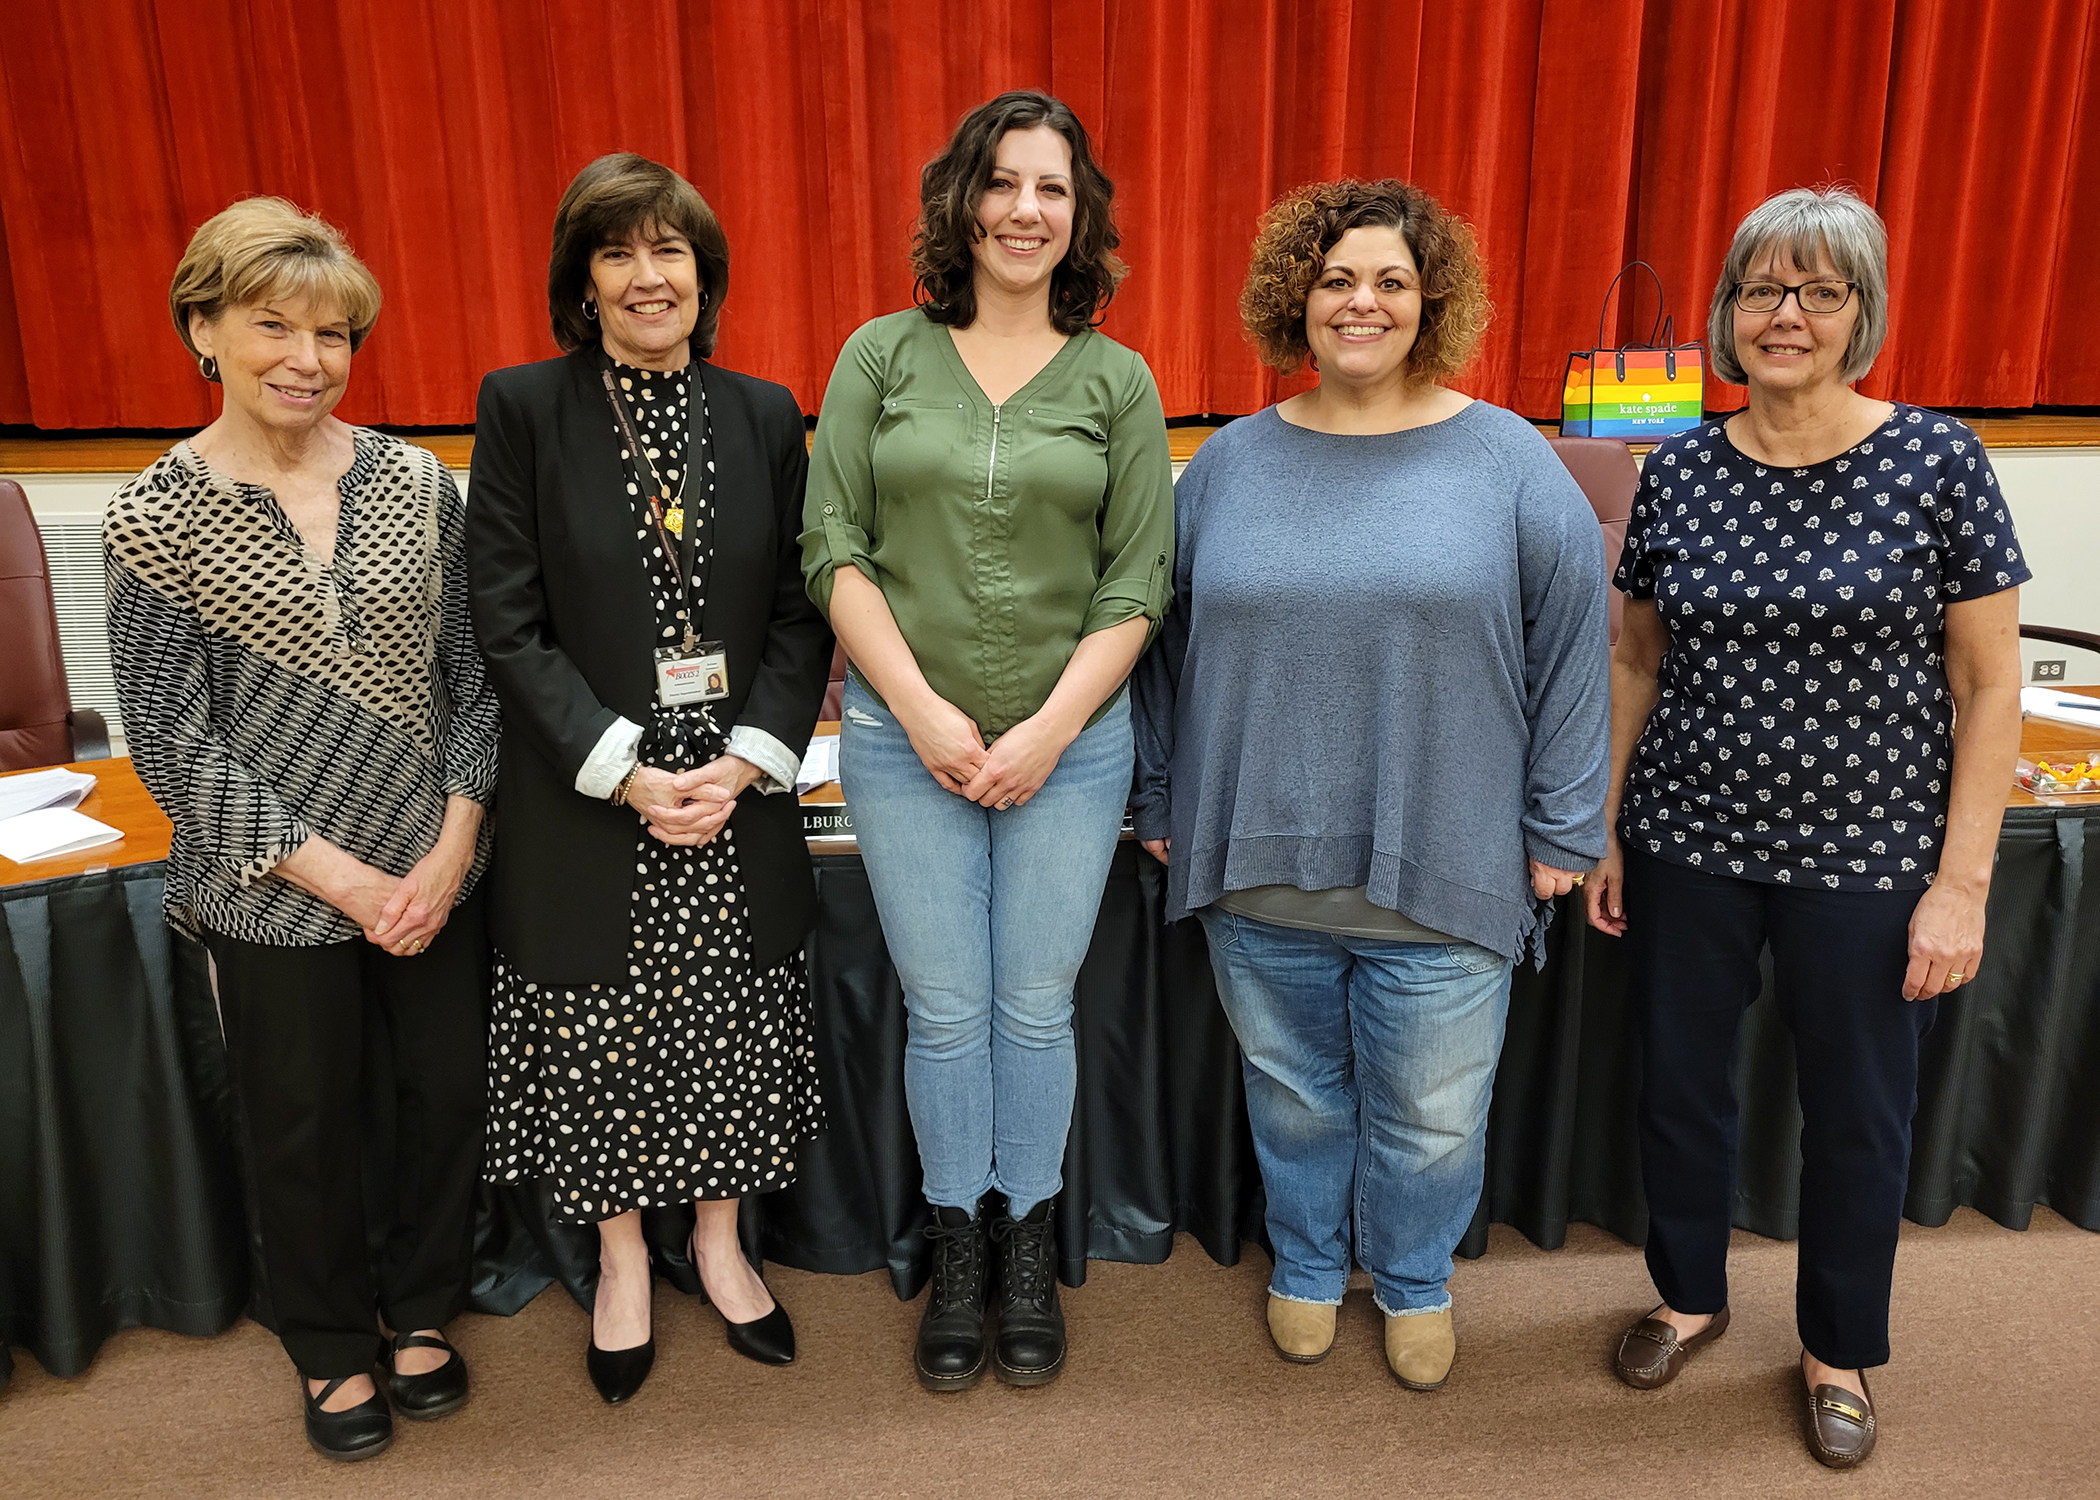 Pictured: (l-r) Charmy Perry, Jo Anne Antonacci, Molly Arnold, Mary Pettine, and Ann Donner. Not present, Kevin Farmer, Mishelle Kittlinger, and Tom Venniro.